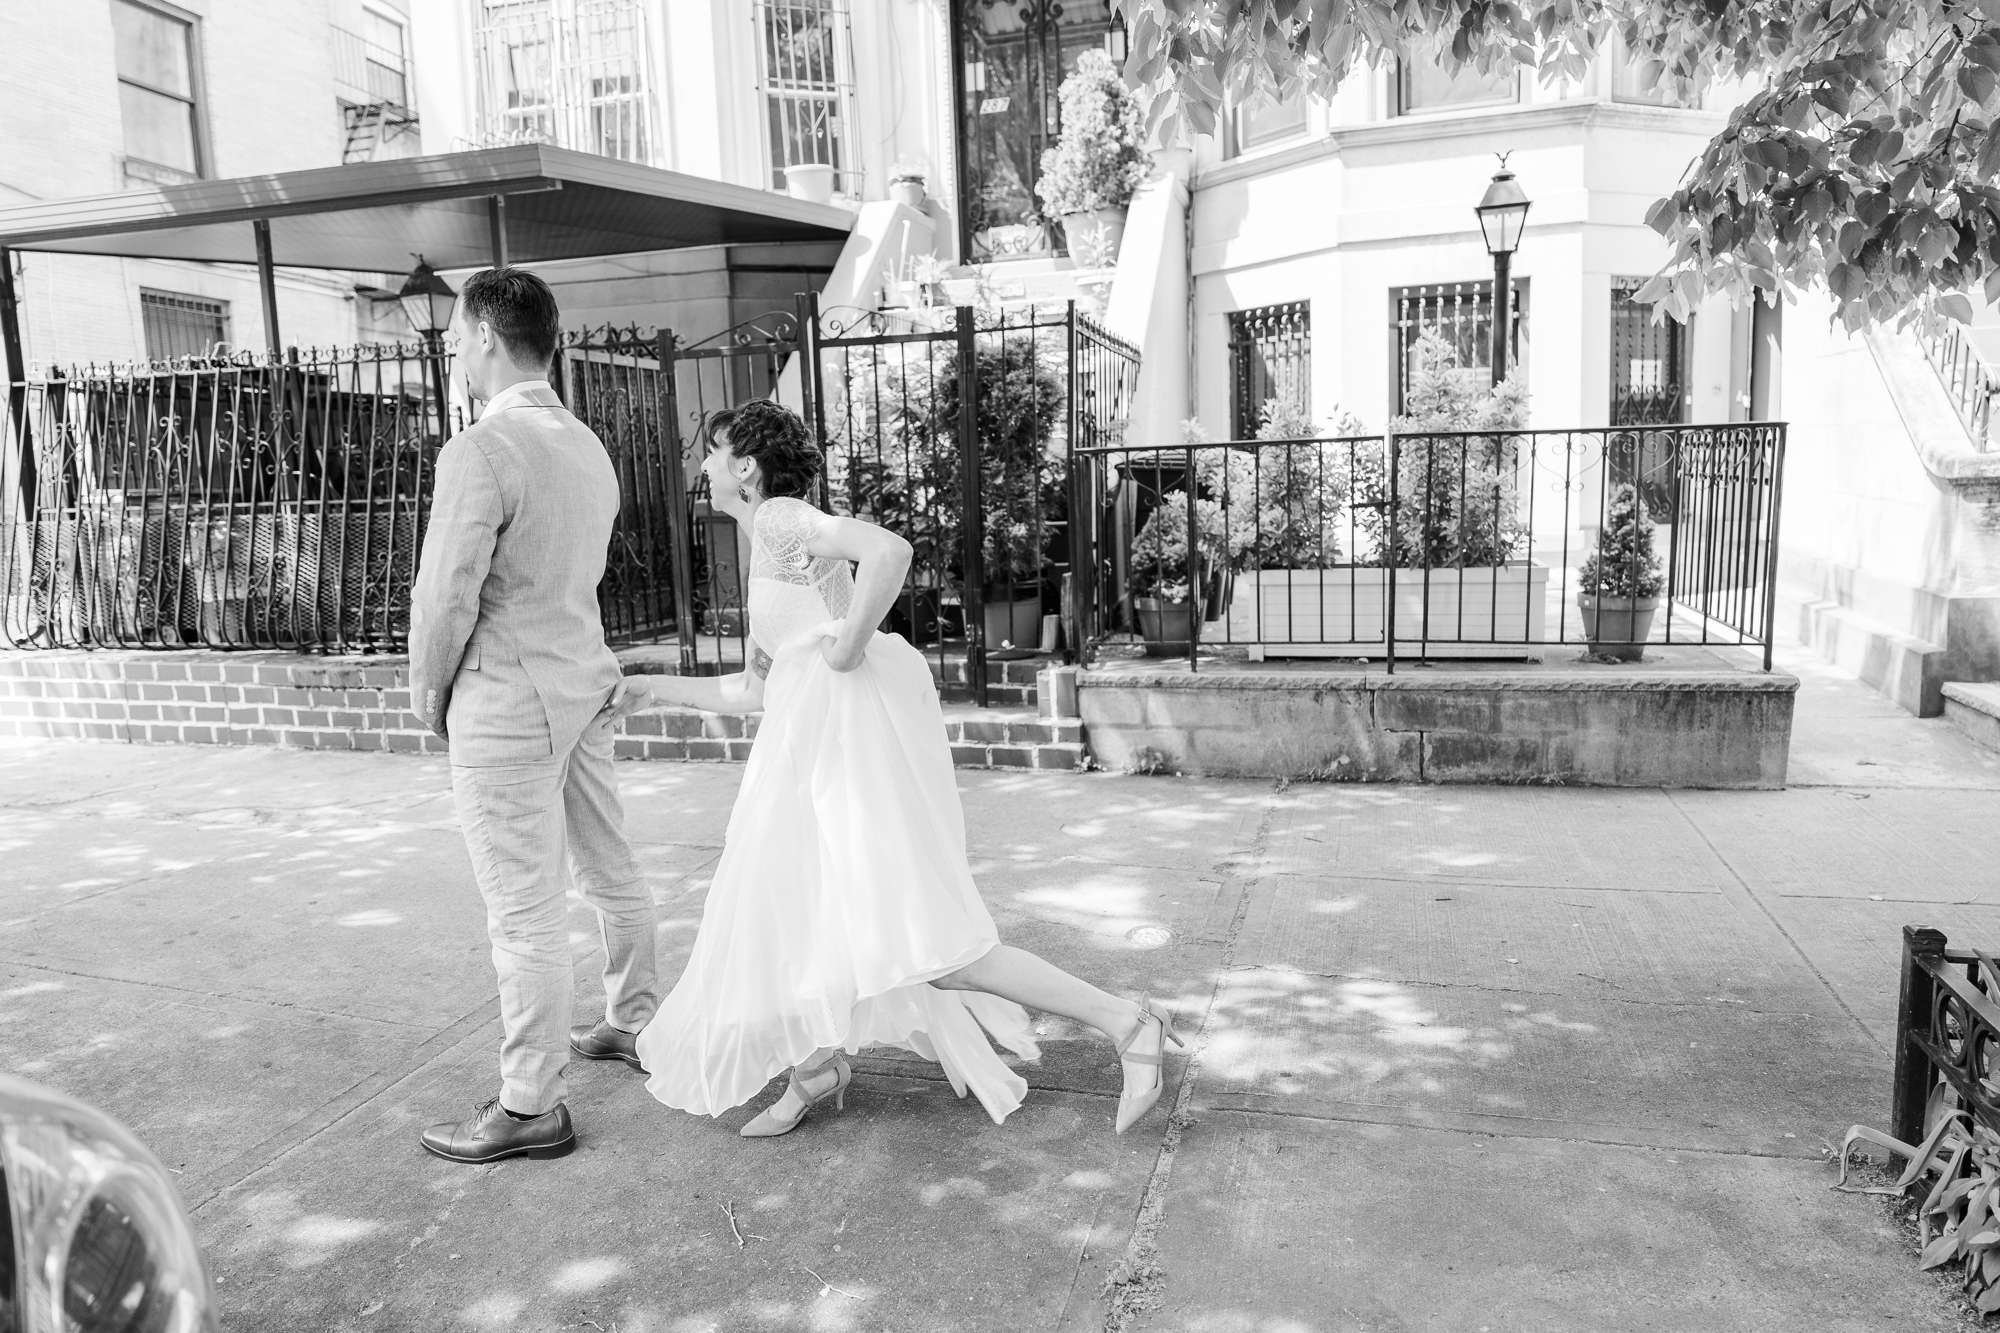 Magical MyMoon Wedding Photo Gallery in Summertime